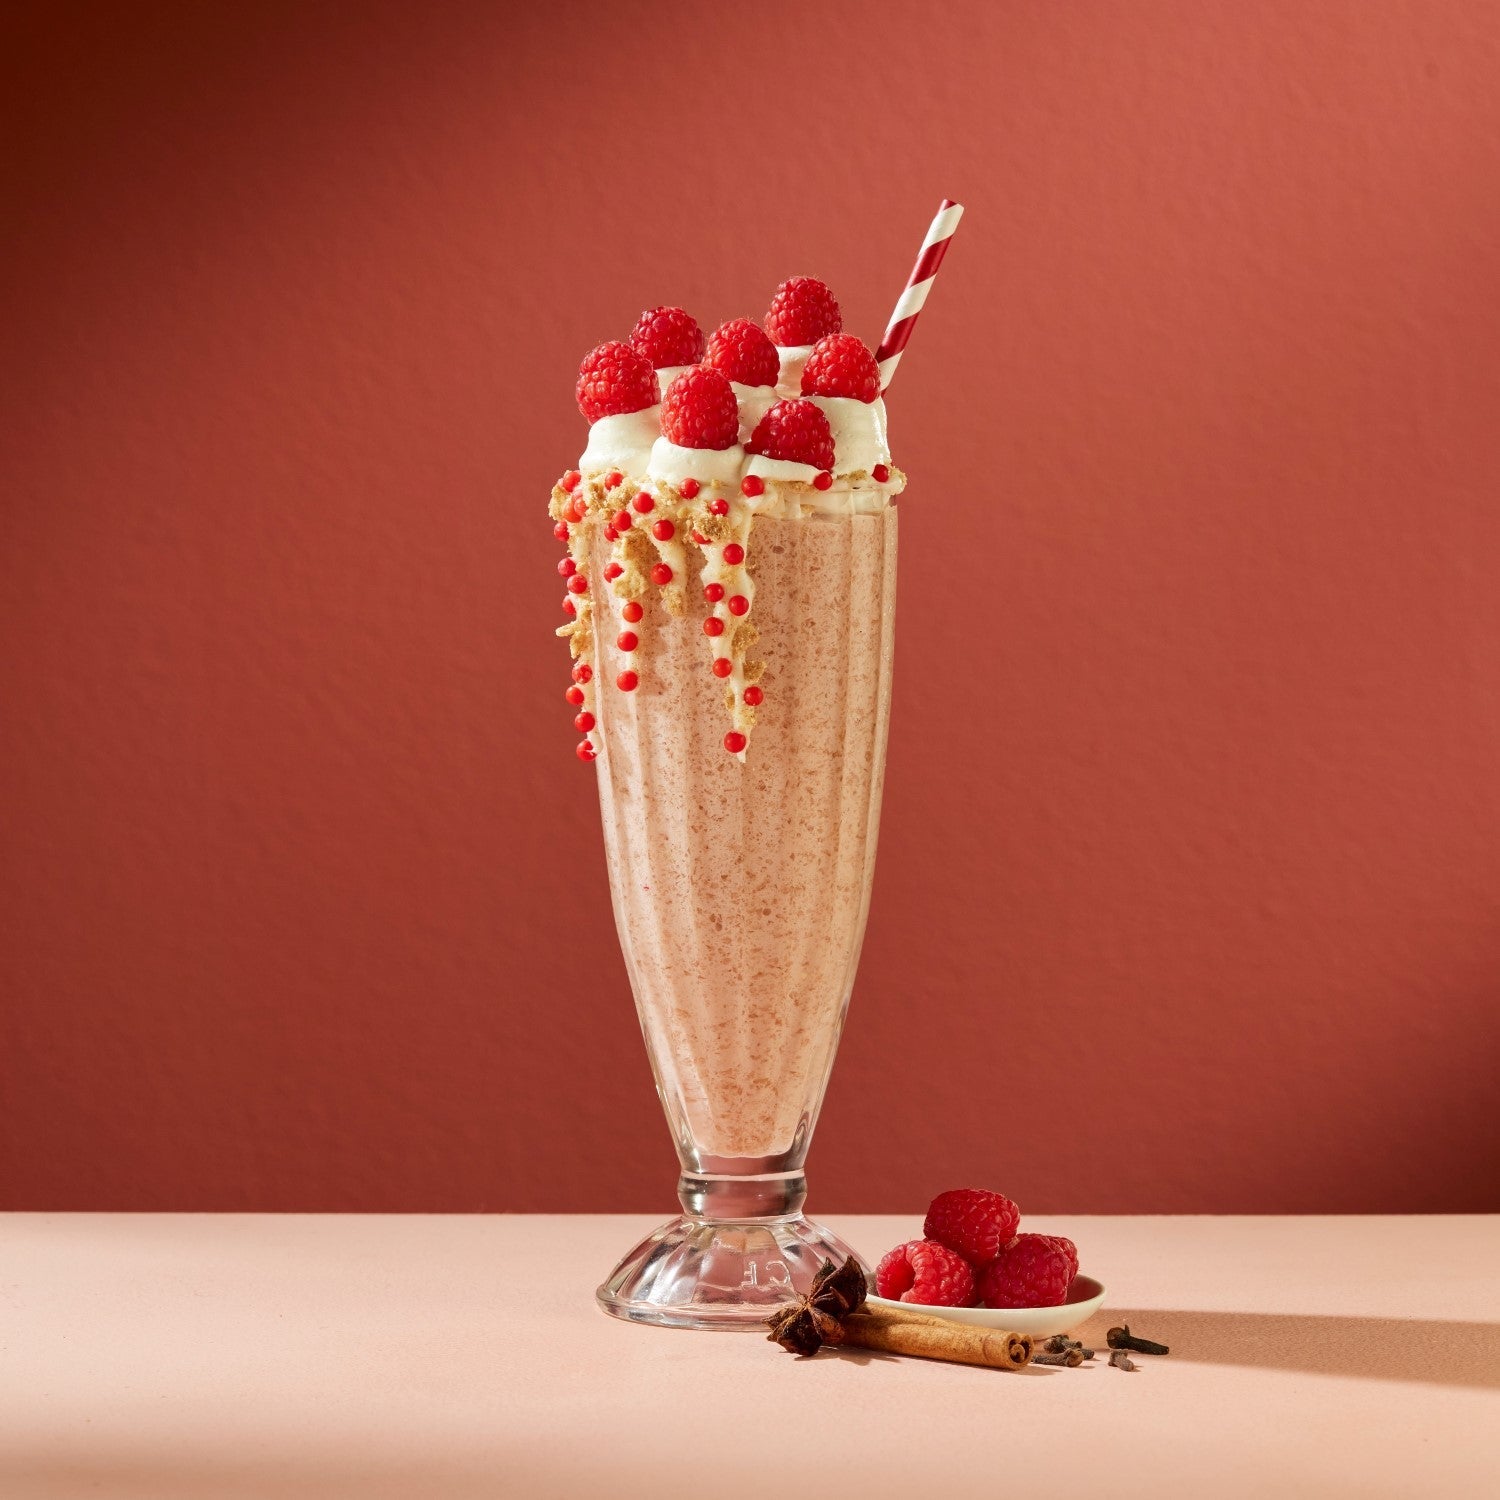 A light pink raspberry chai shake in a classic milkshake glass topped with fresh raspberries standing out in front of a solid red background